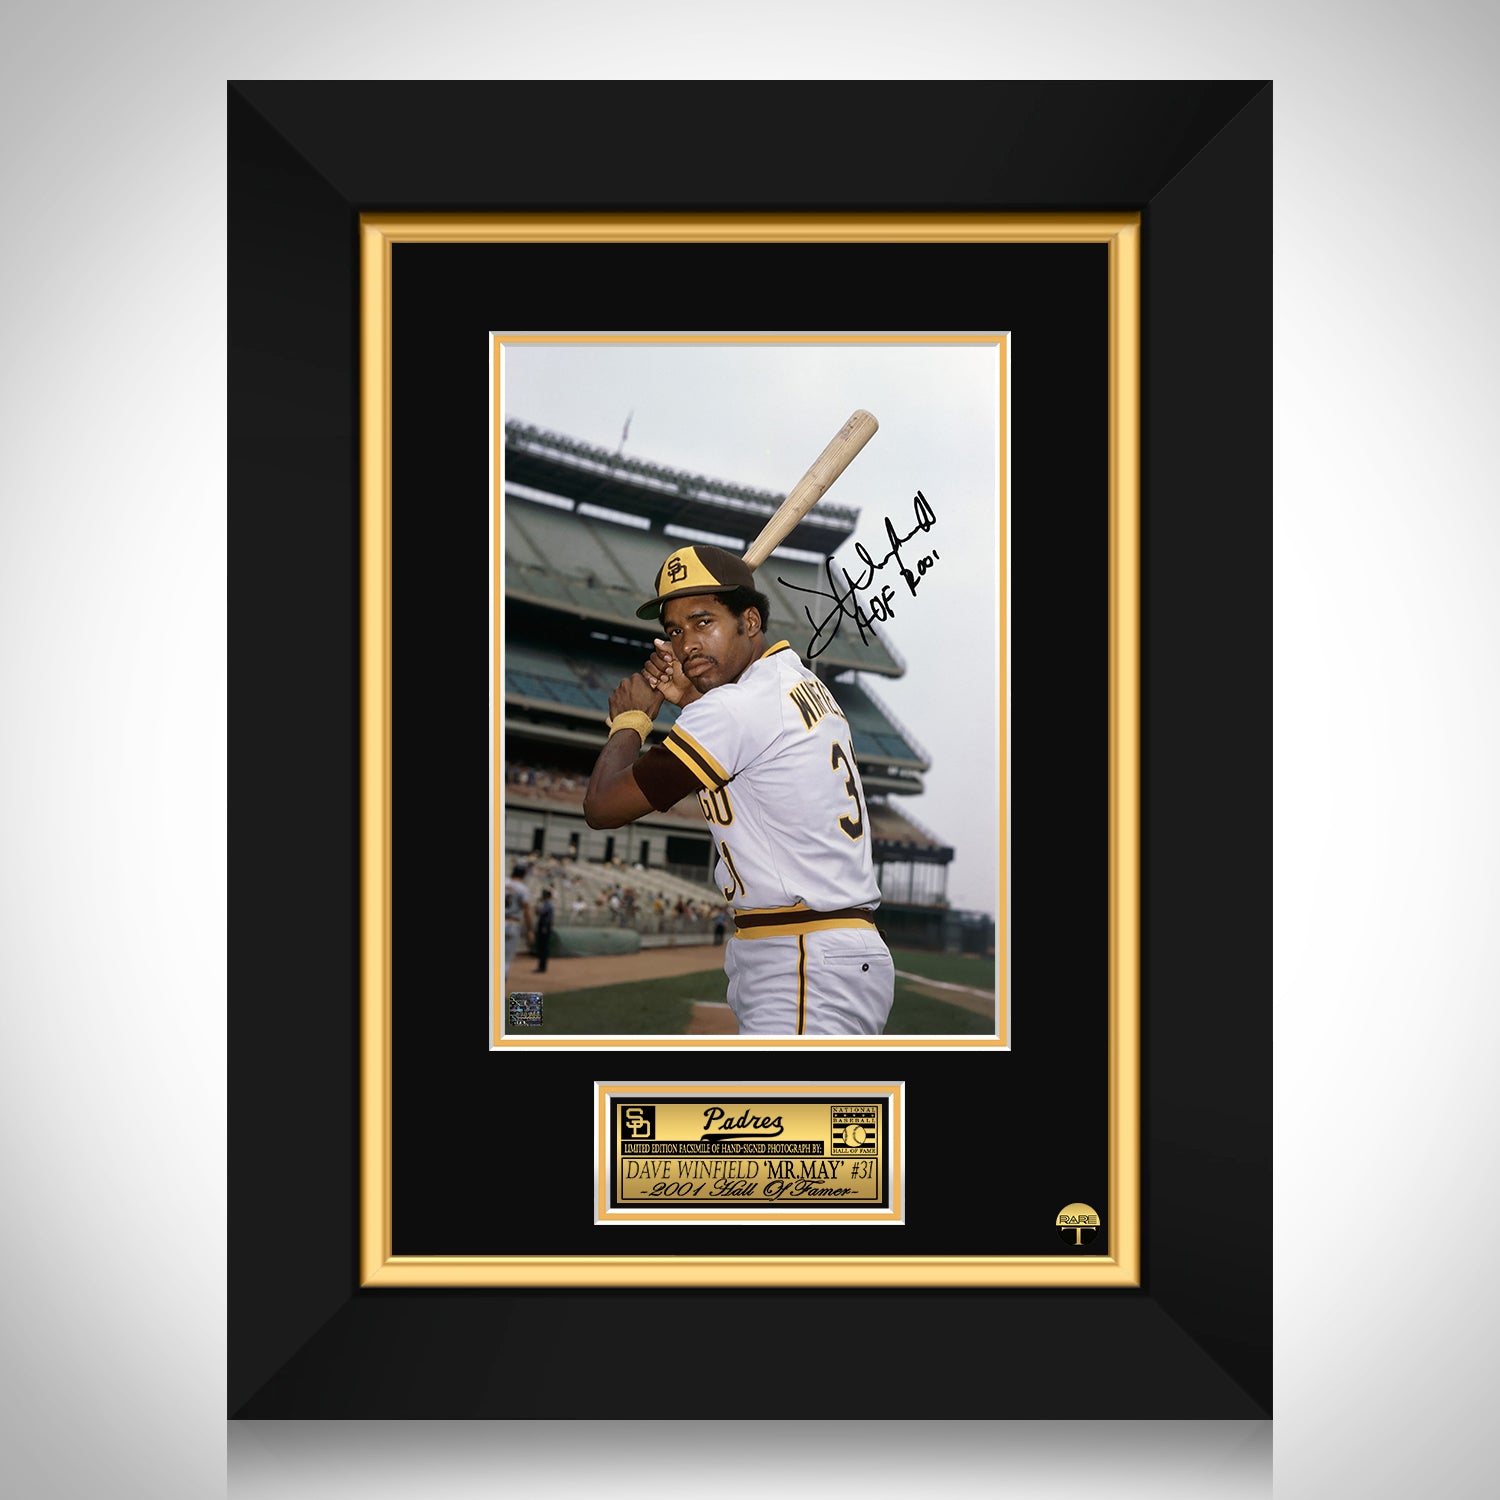 Dave Winfield Signed San Diego Padres 31x 35 Custom Framed